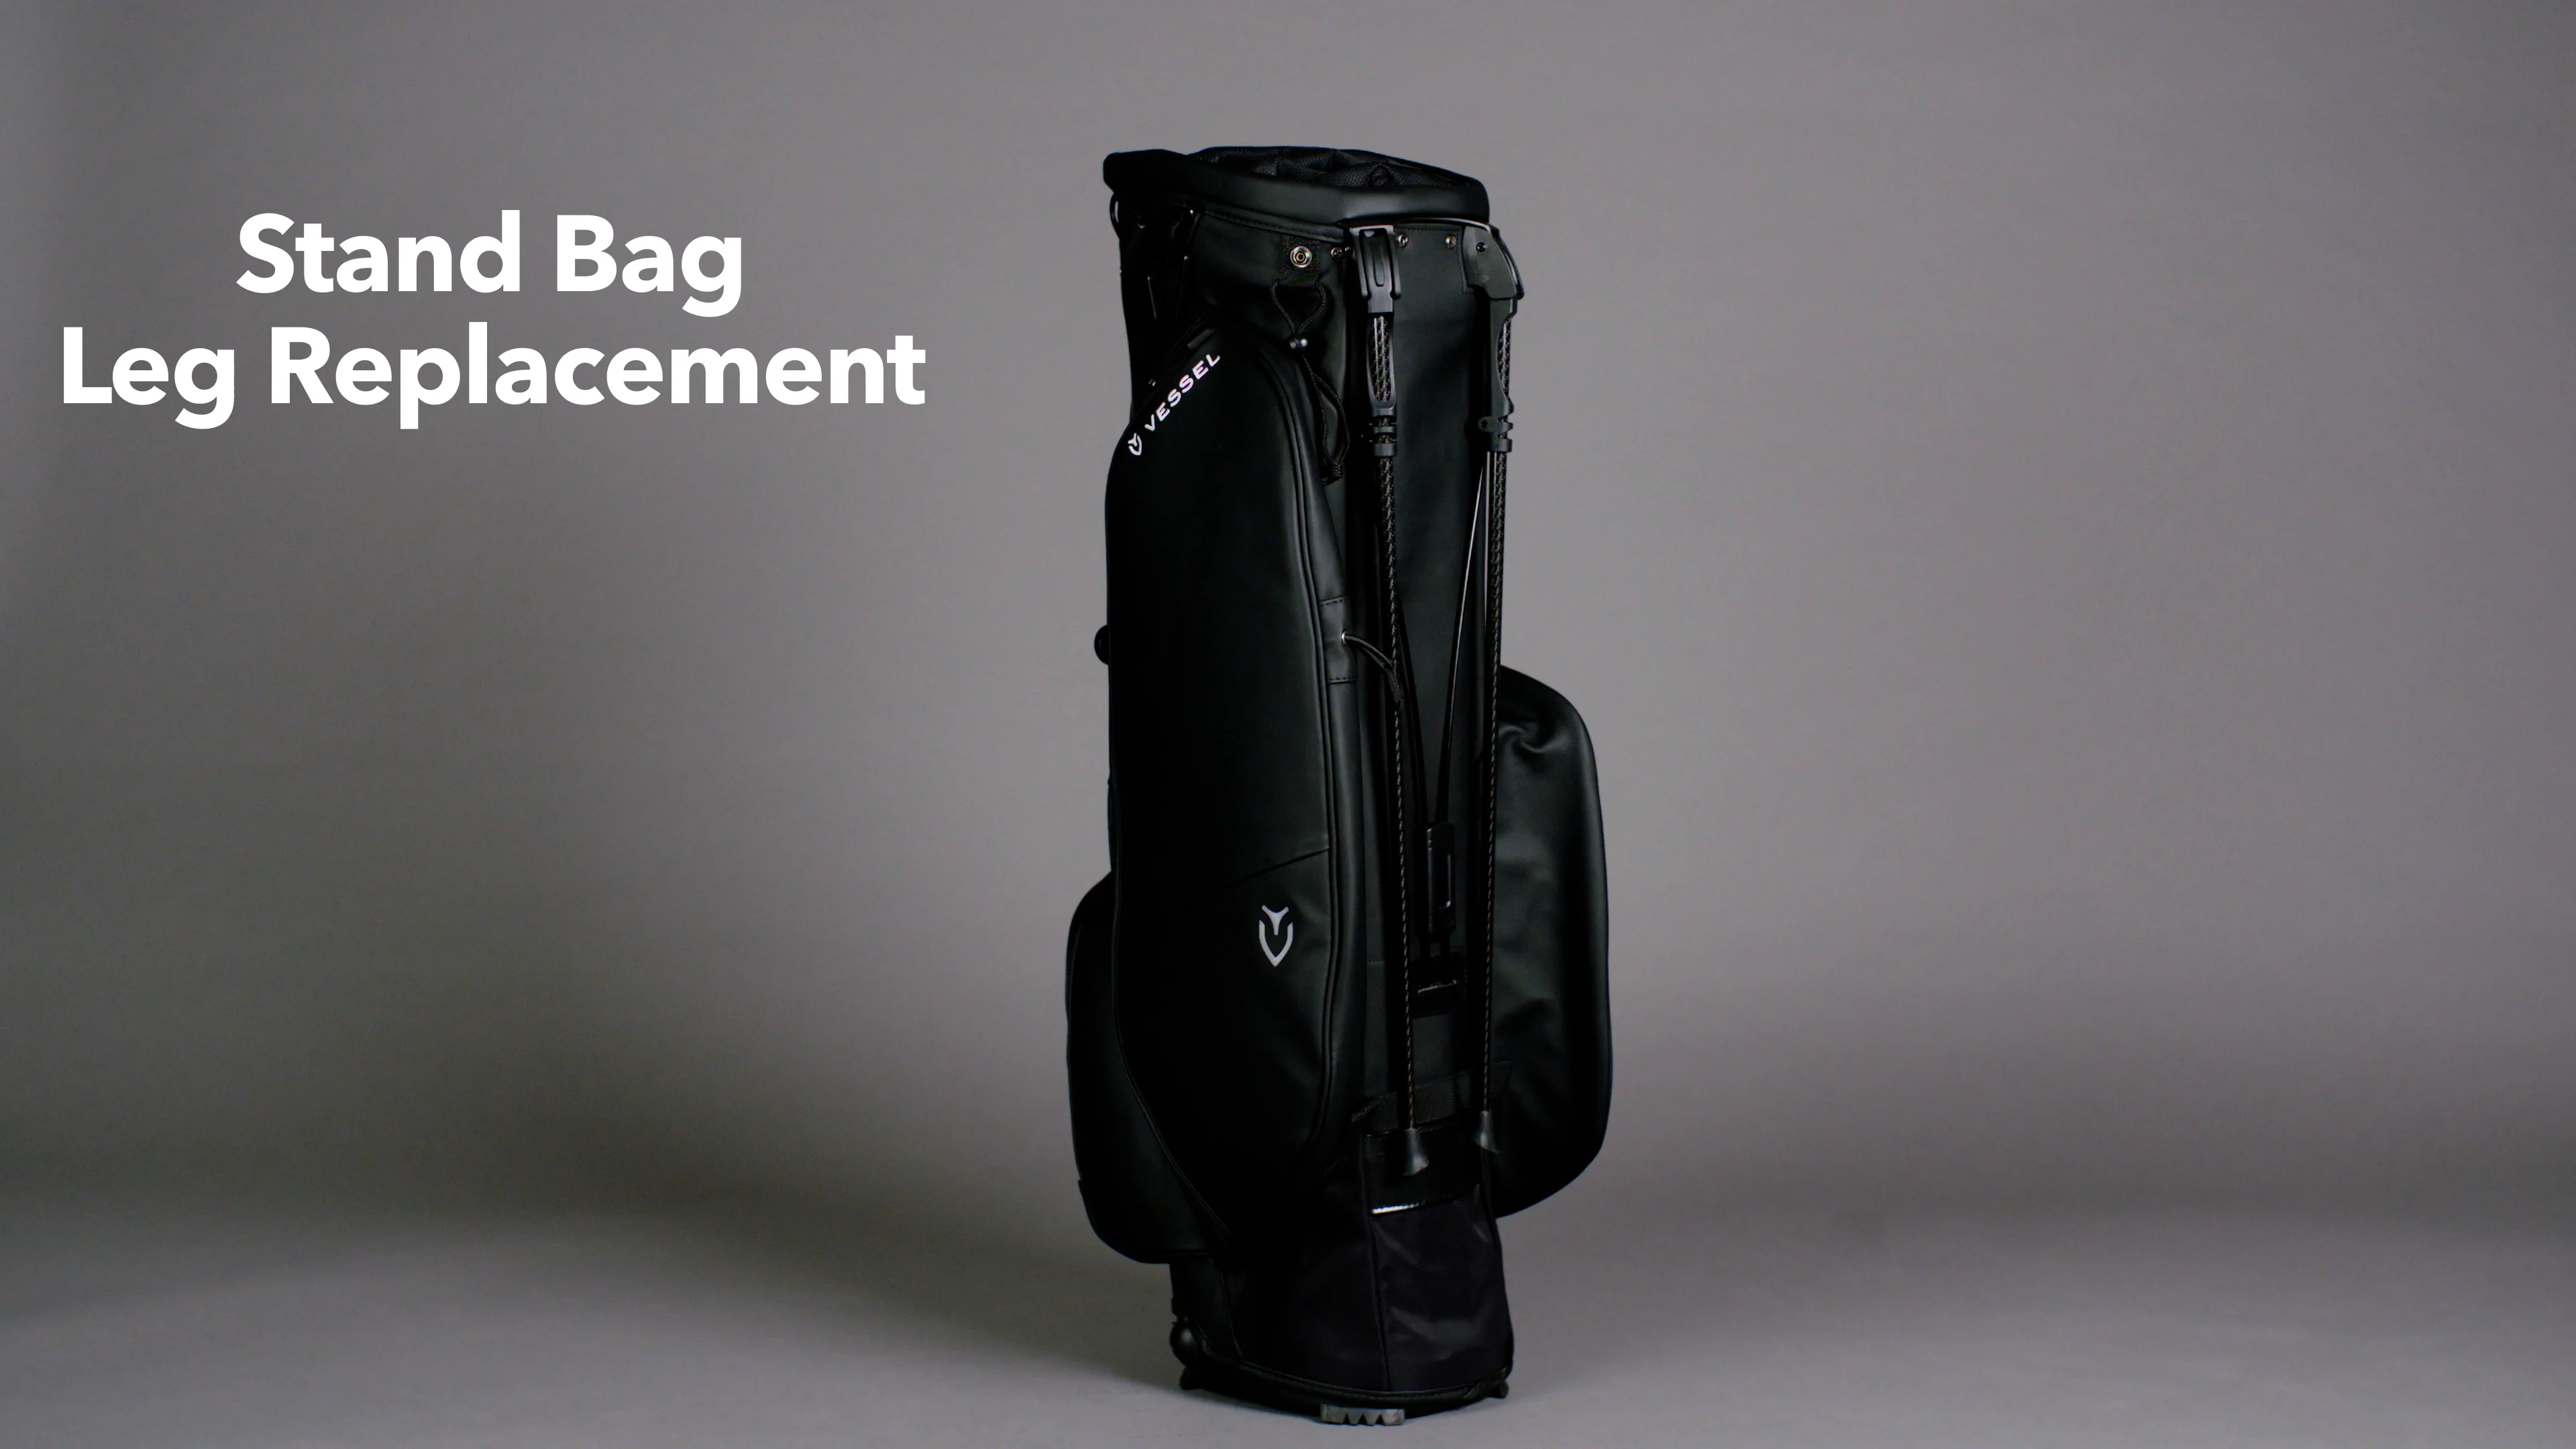 Vessel Stand Bag Leg Replacement on Vimeo